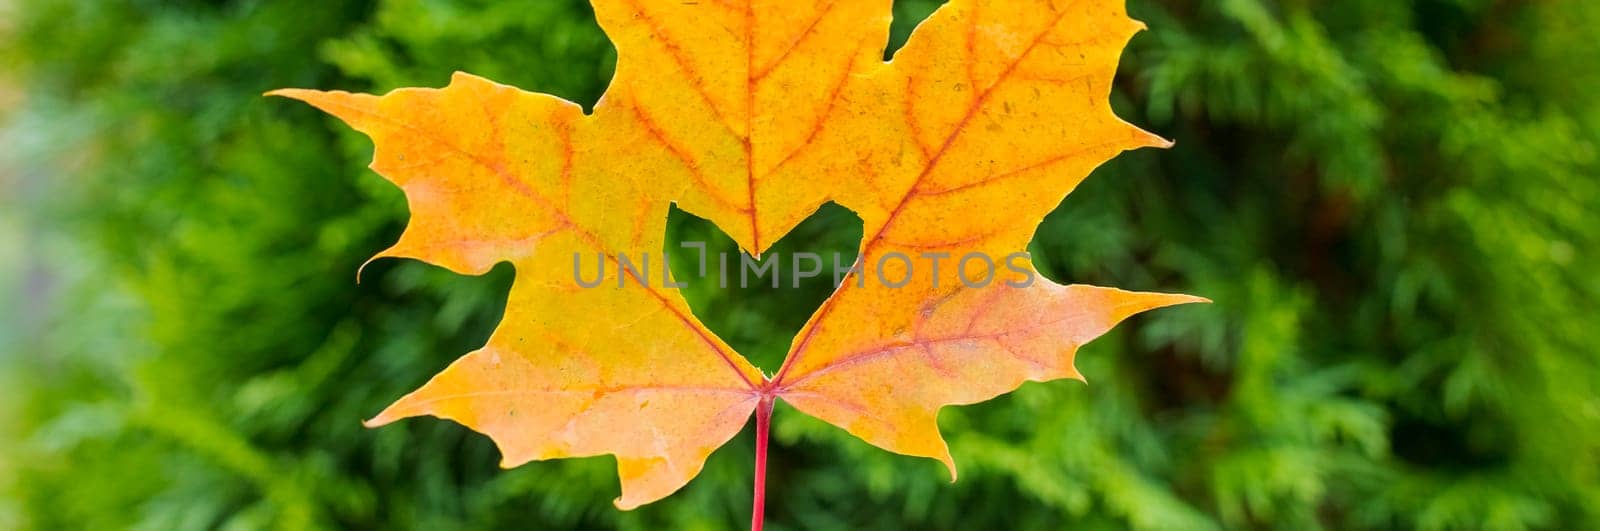 A heart in an autumn leaf on a background of grained wood.